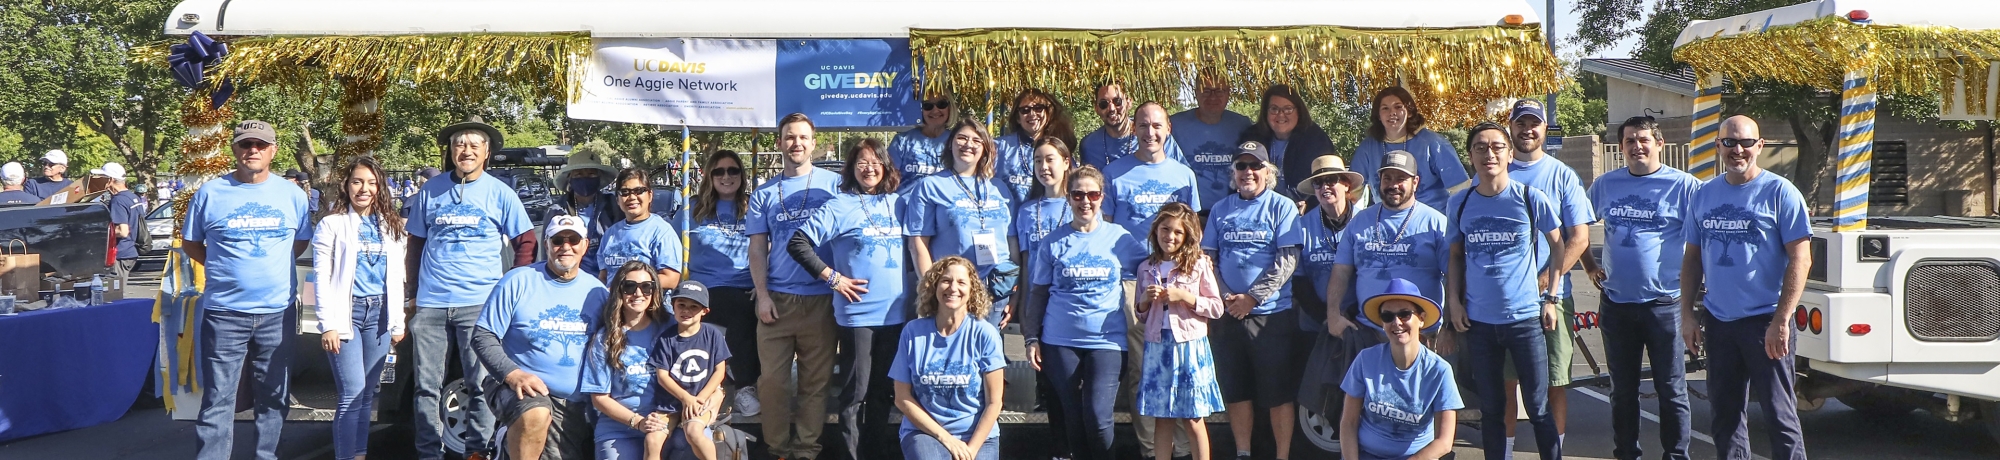 A group of volunteers wearing matching blue &#34;Give Day&#34; shirts pose for a photo in front of the tram as part of the Picnic Day parade.